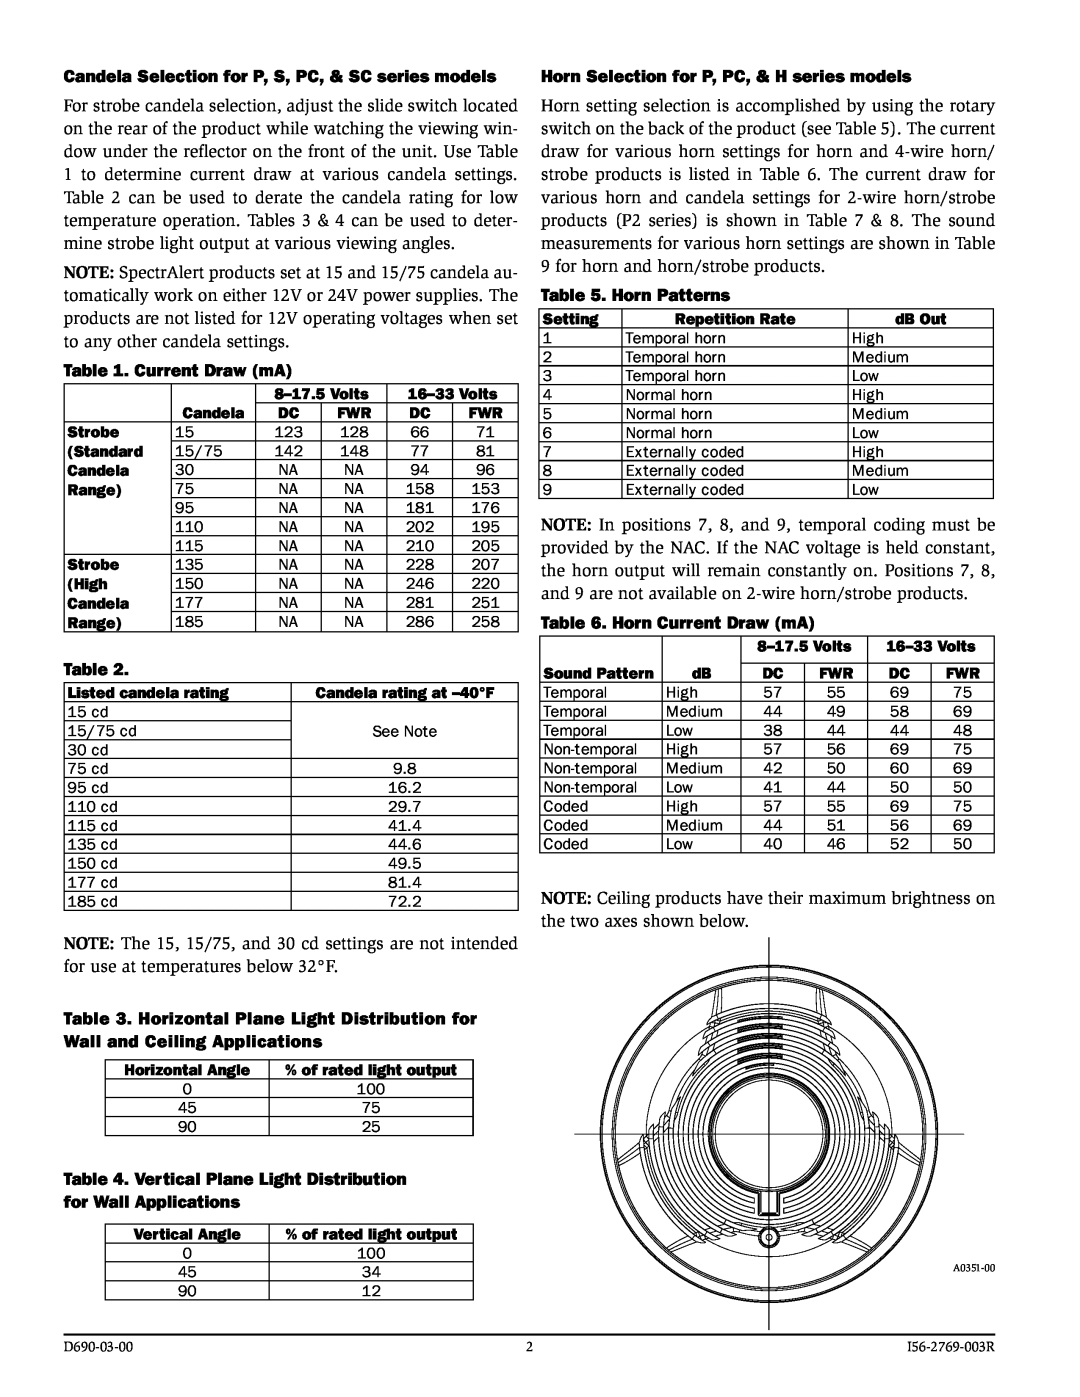 System Sensor P2R specifications Horn Selection for P, PC, & H series models, Horn Patterns, Horn Current Draw mA 